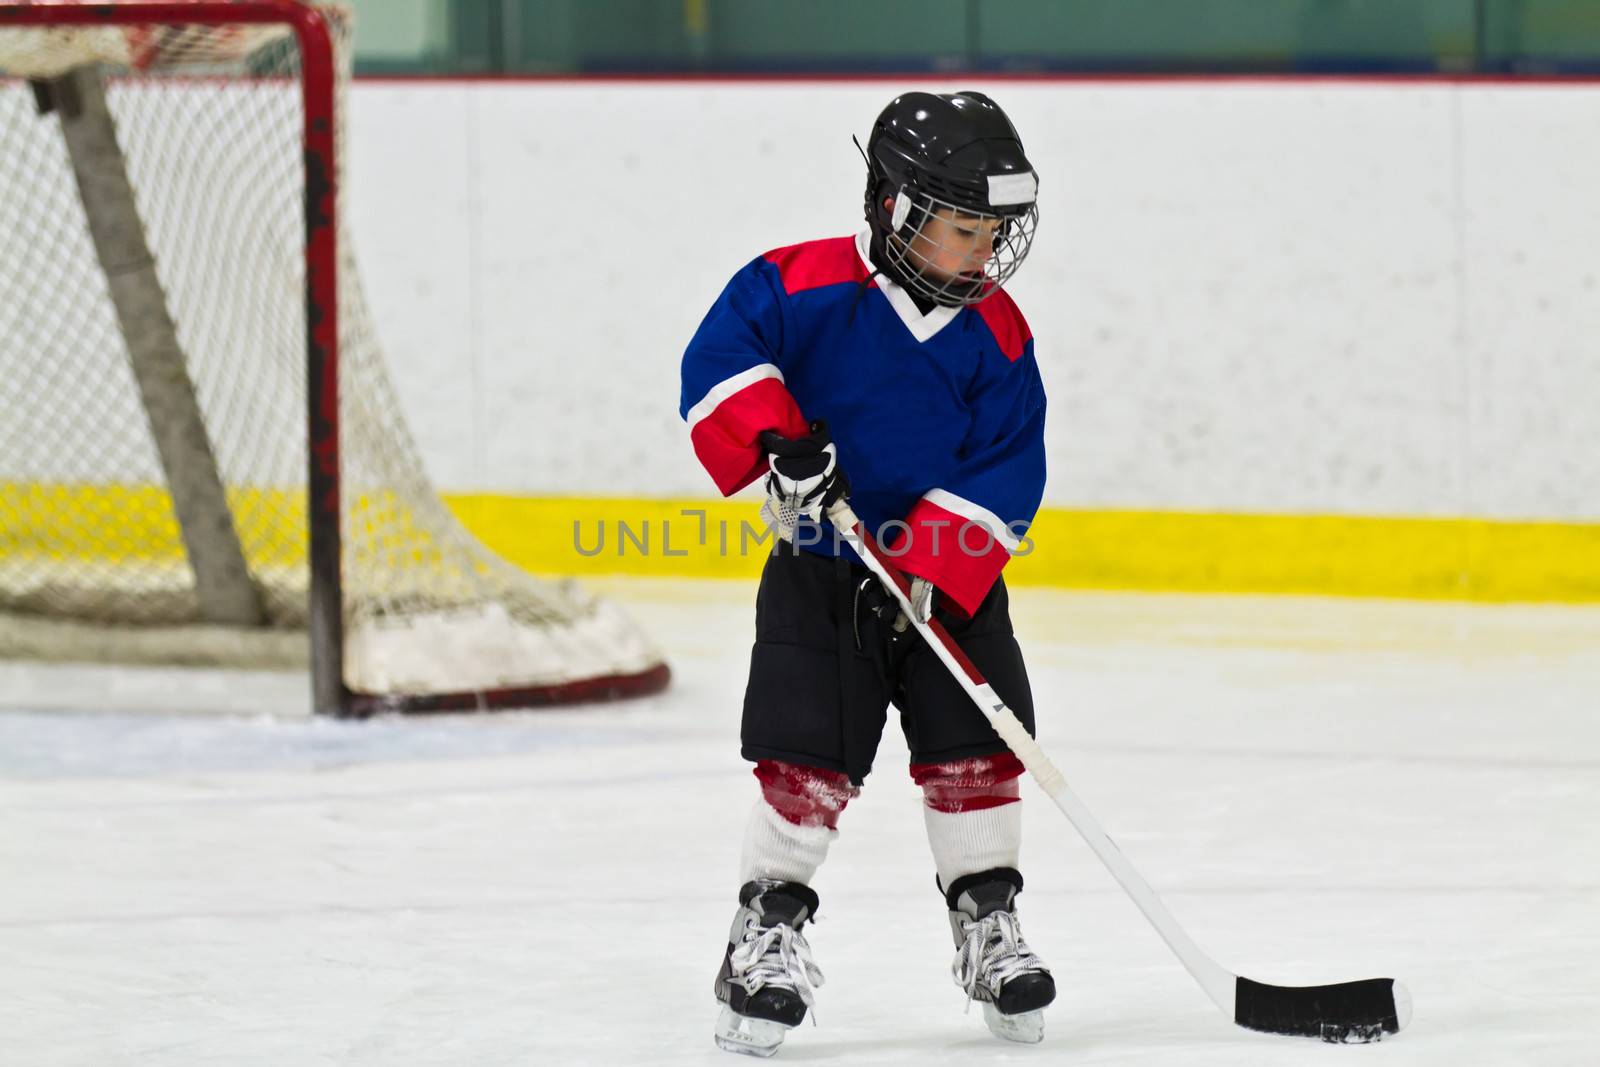 Child skating with a puck at ice hockey practice by bigjohn36